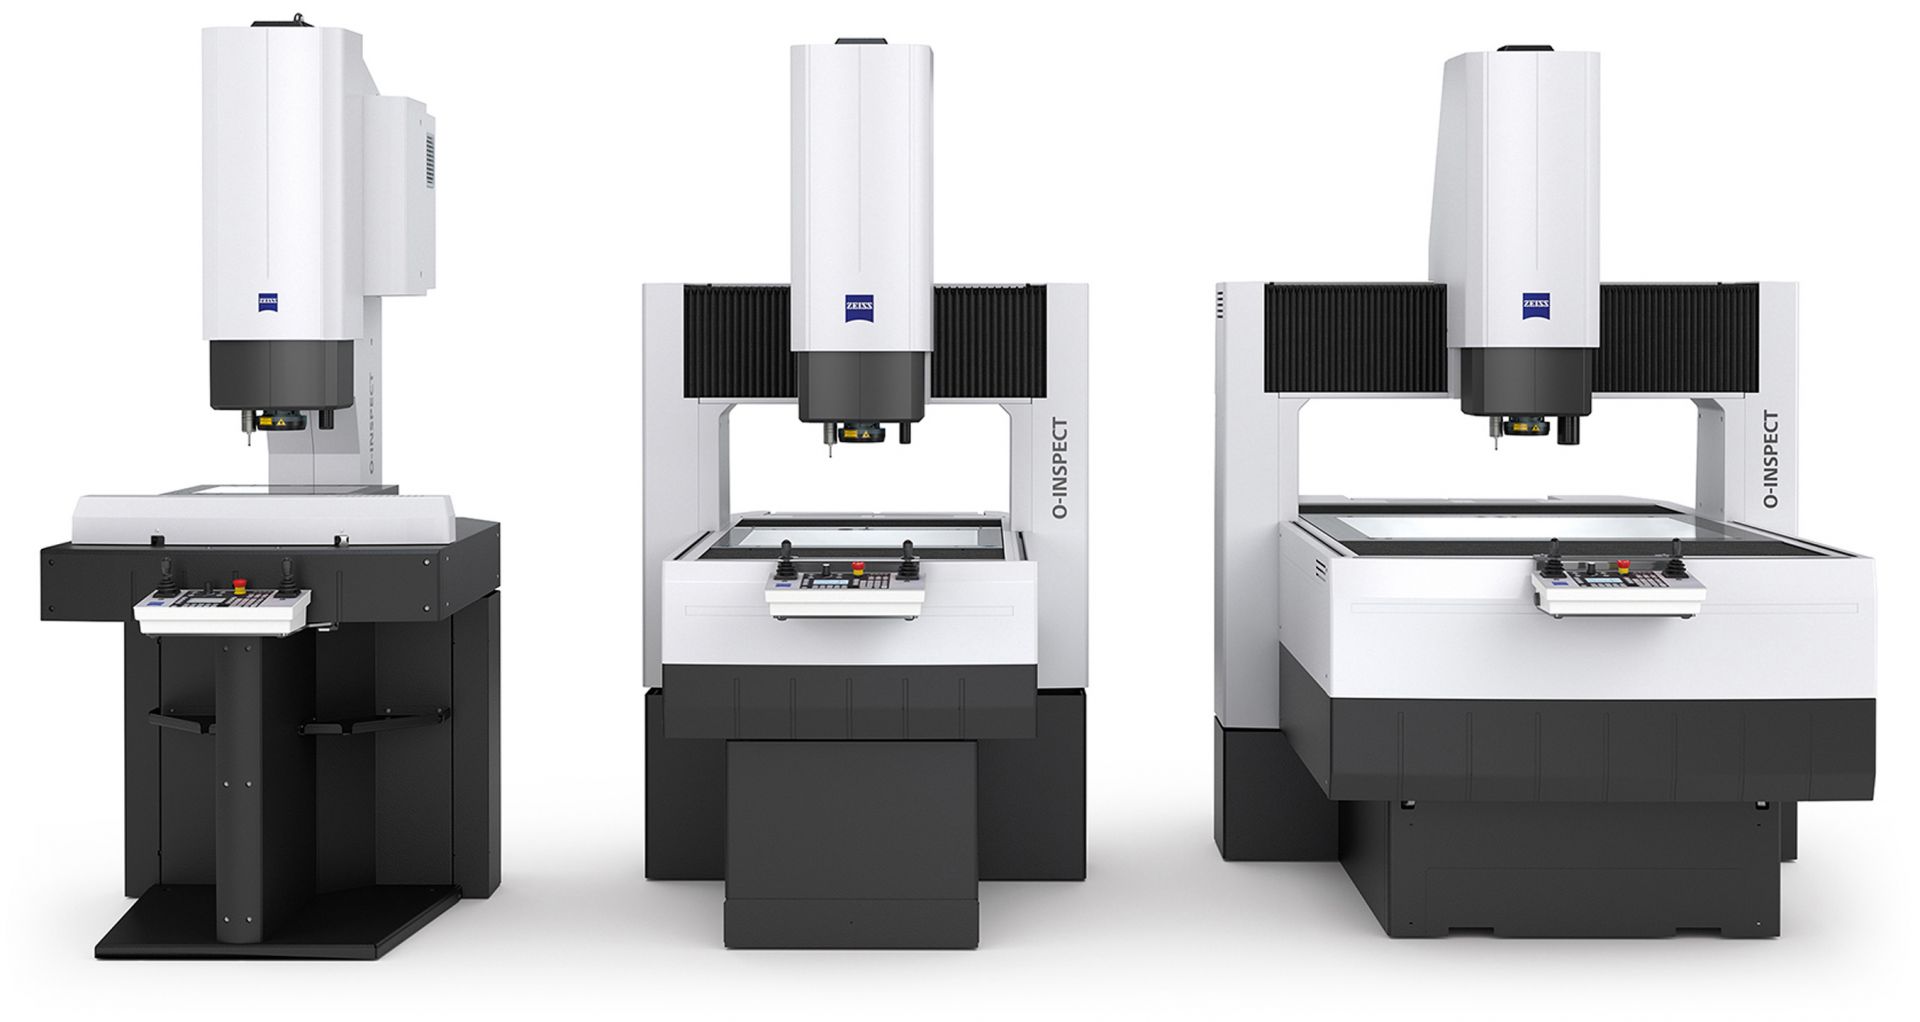 ZEISS O-INSPECT for different part sizes